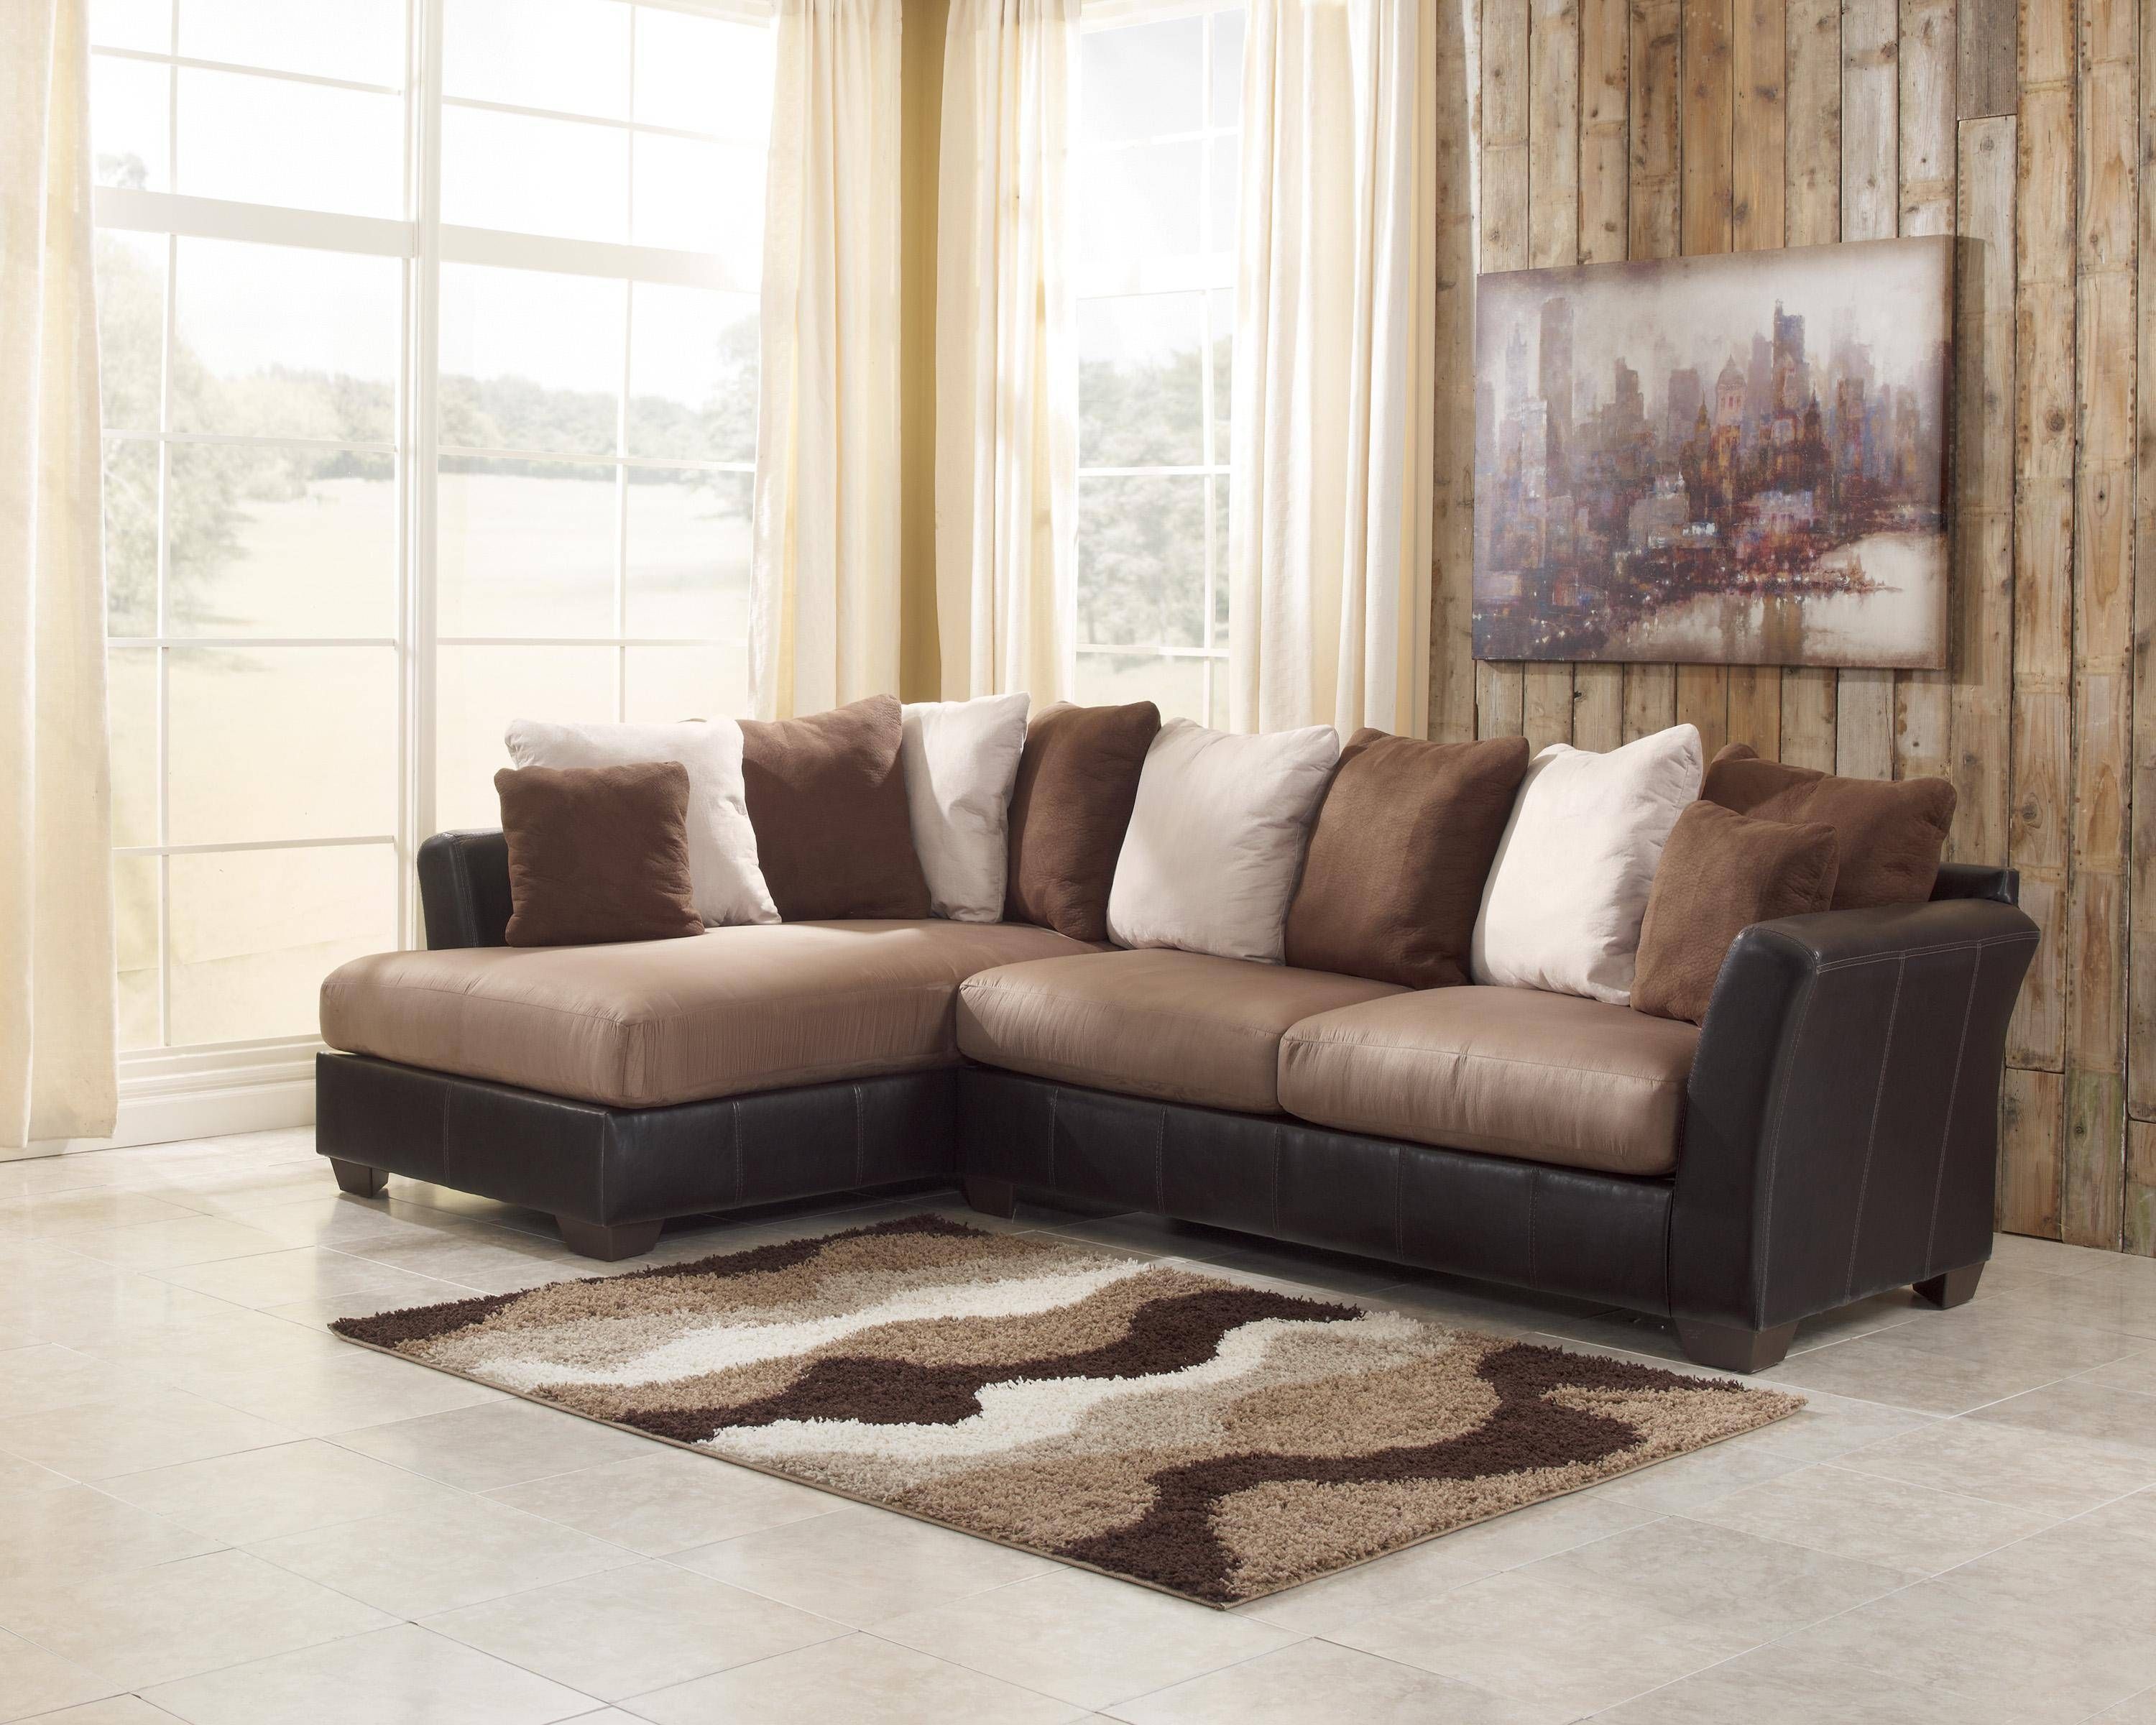 Two Piece Sectional Sofa | Tehranmix Decoration Intended For Pieces Individual Sectional Sofas (View 4 of 15)